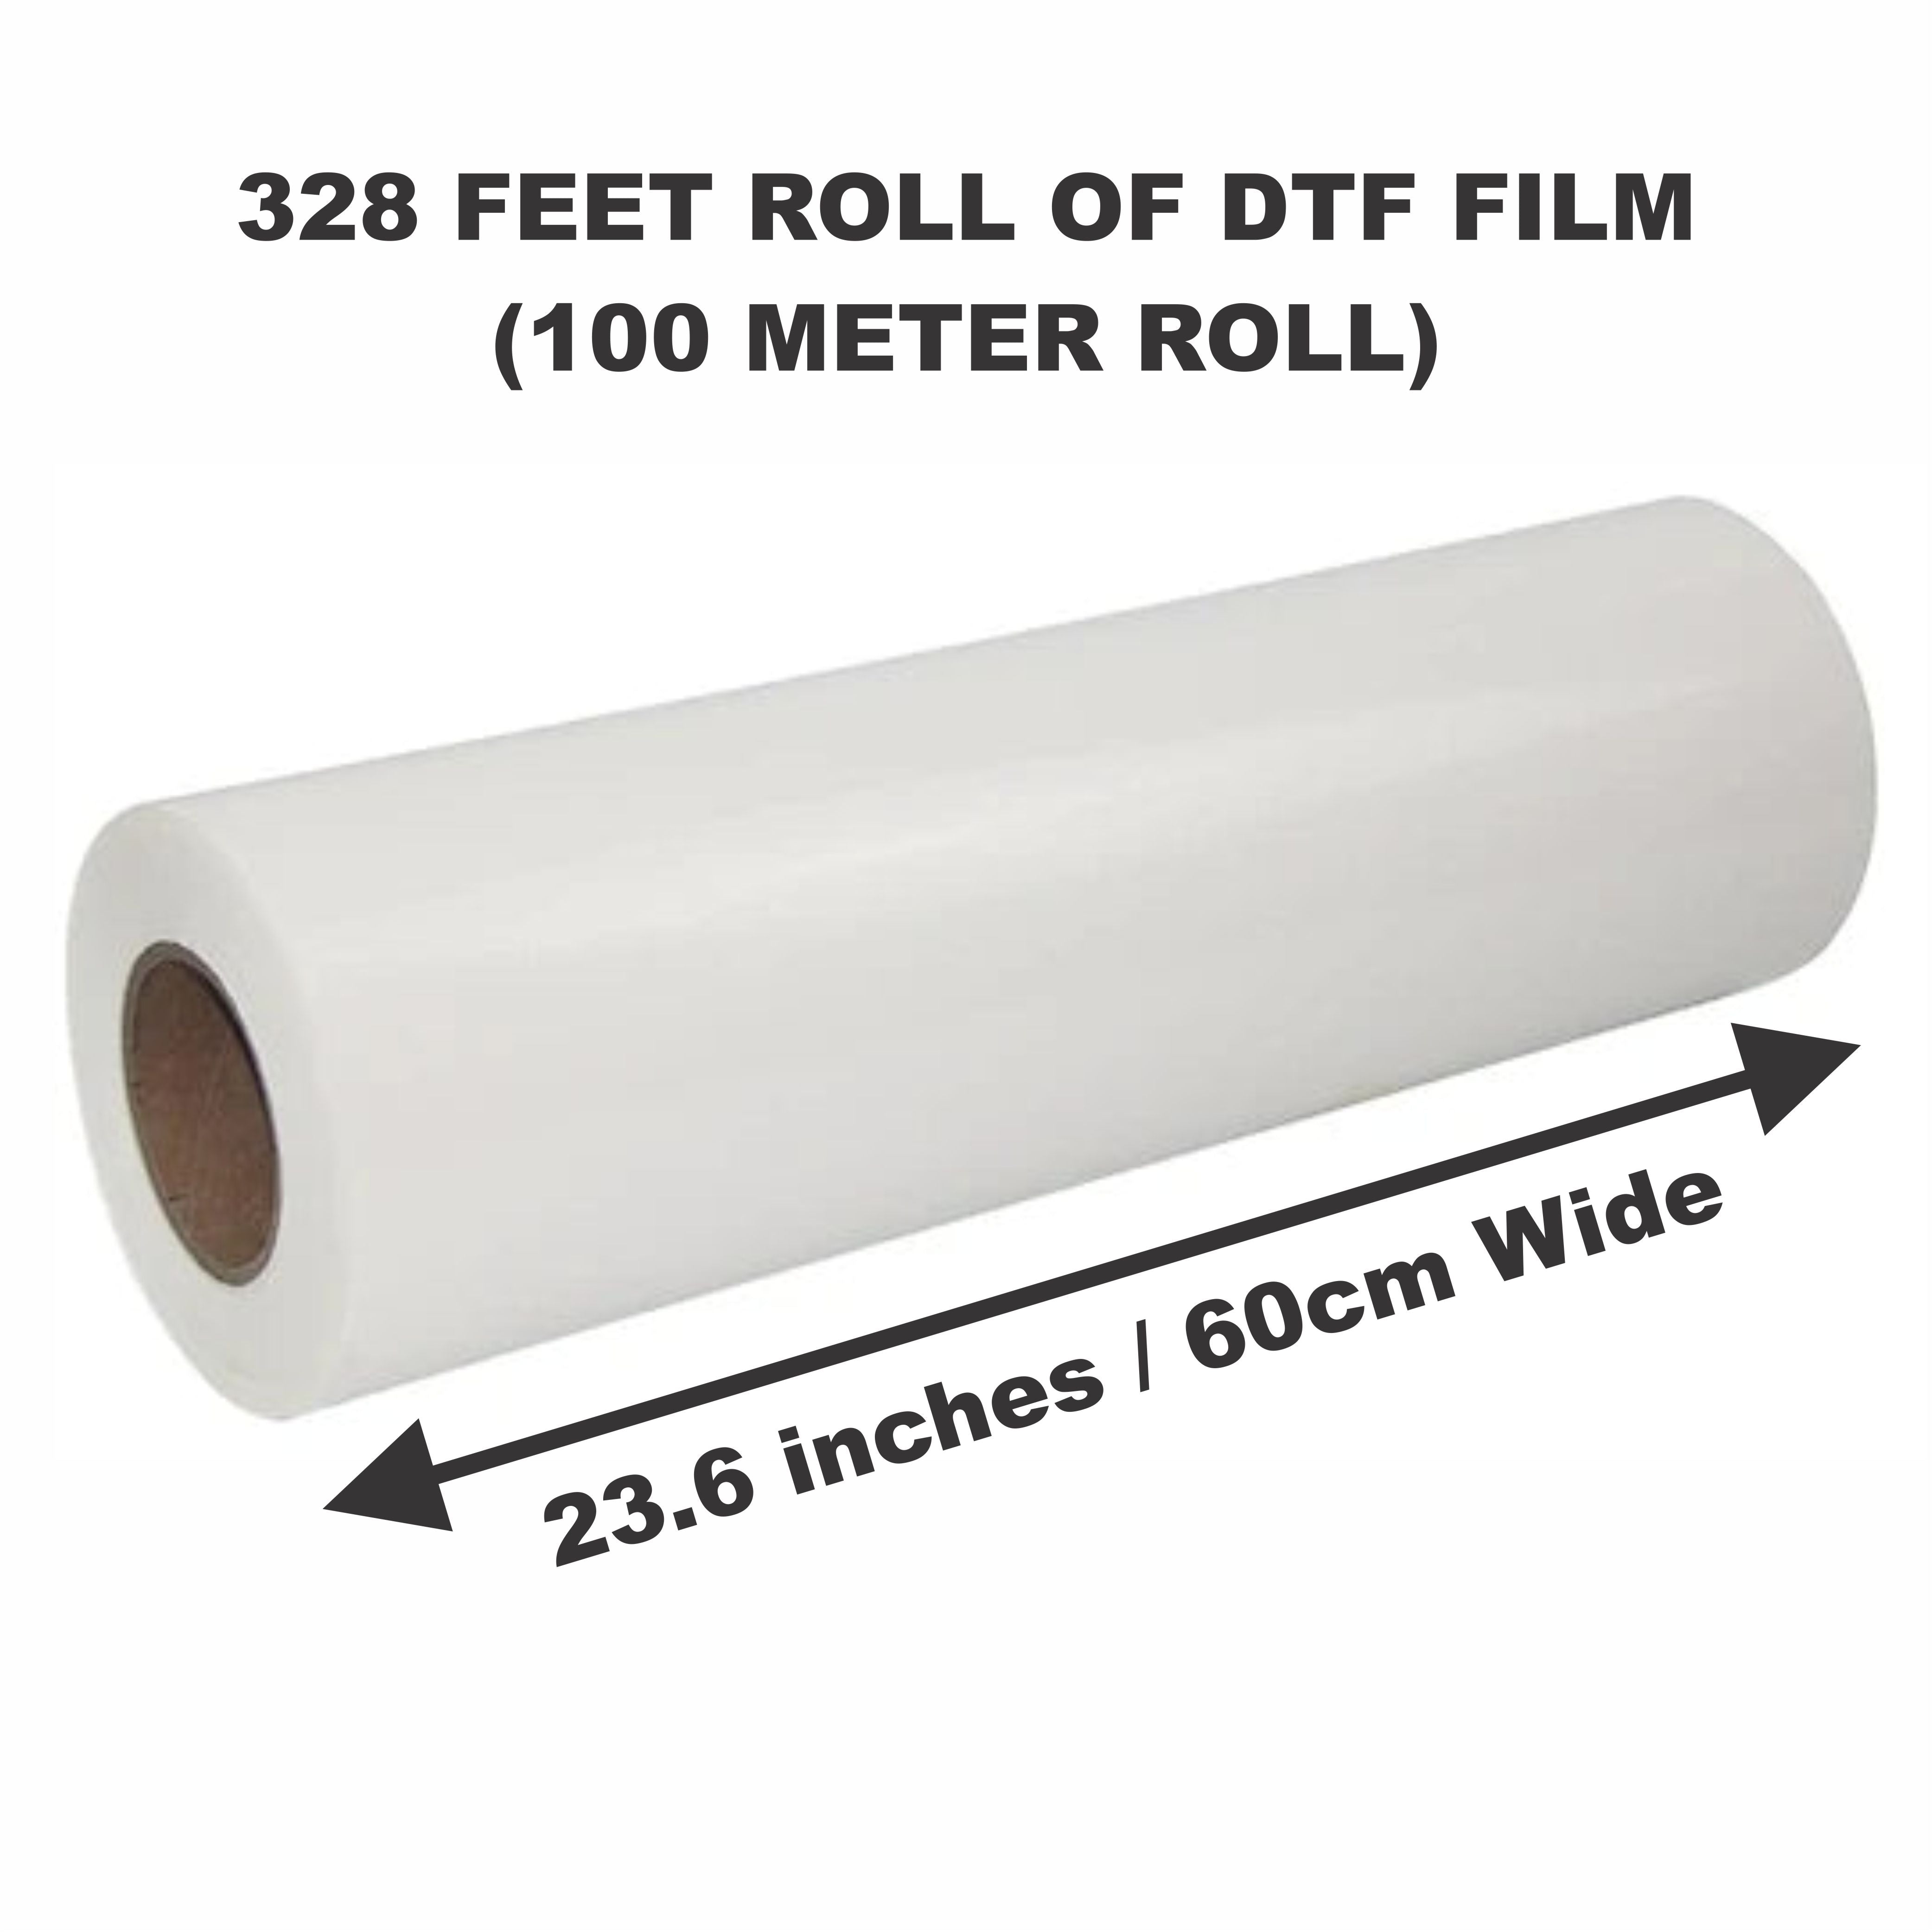 23.6” x 328 Feet Roll Of DTF Film - Double Sided Cold/Warm Peel